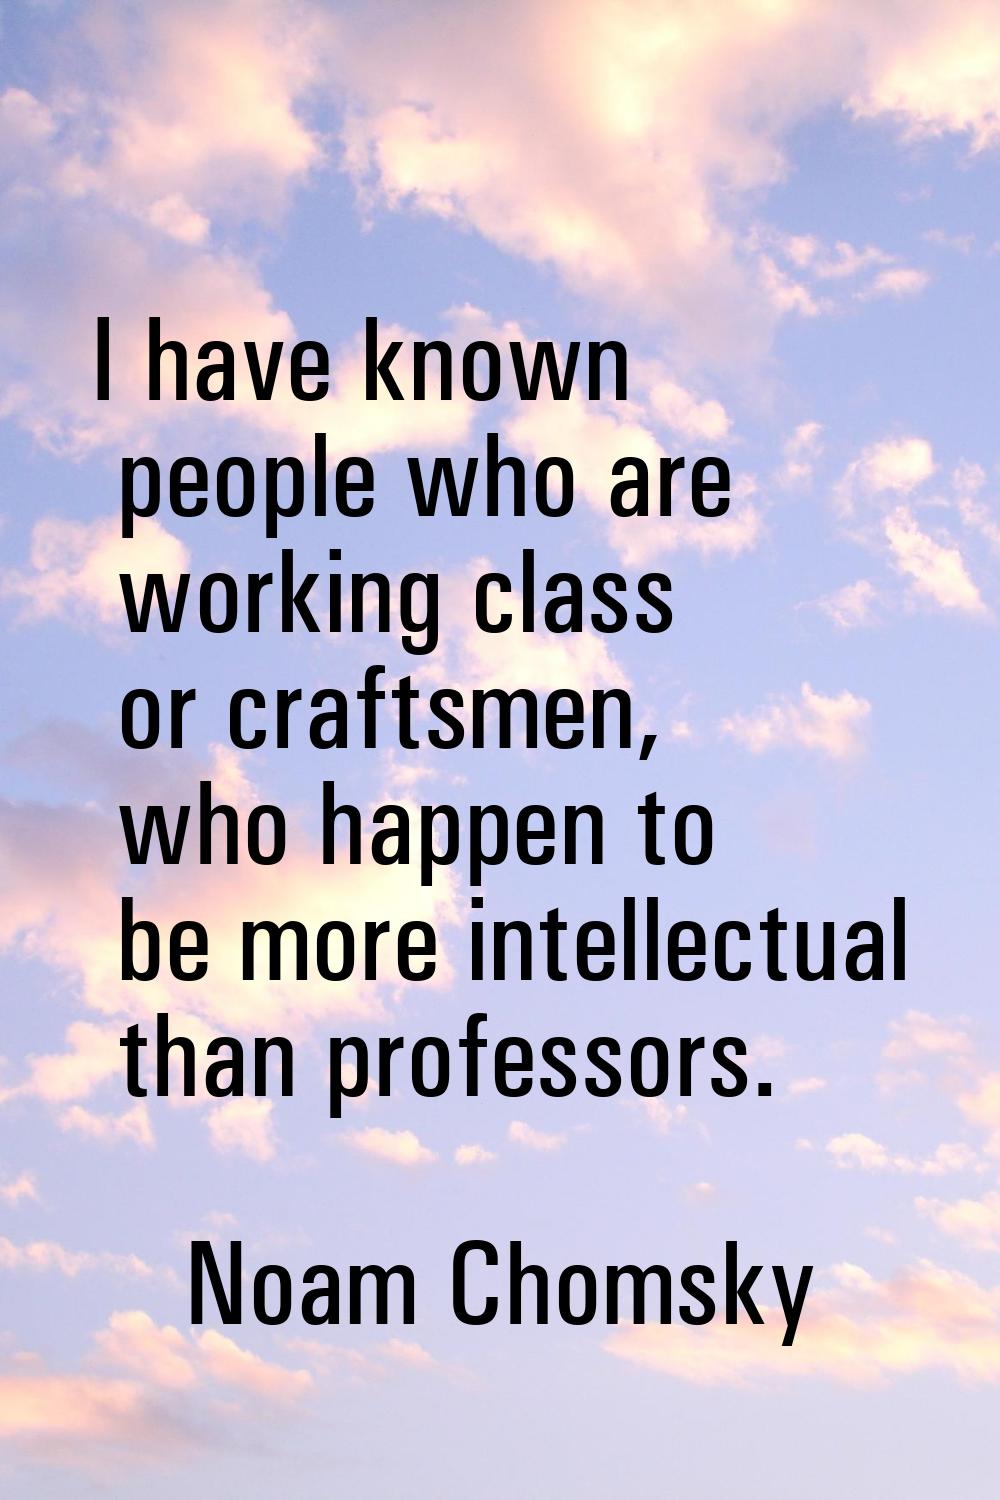 I have known people who are working class or craftsmen, who happen to be more intellectual than pro